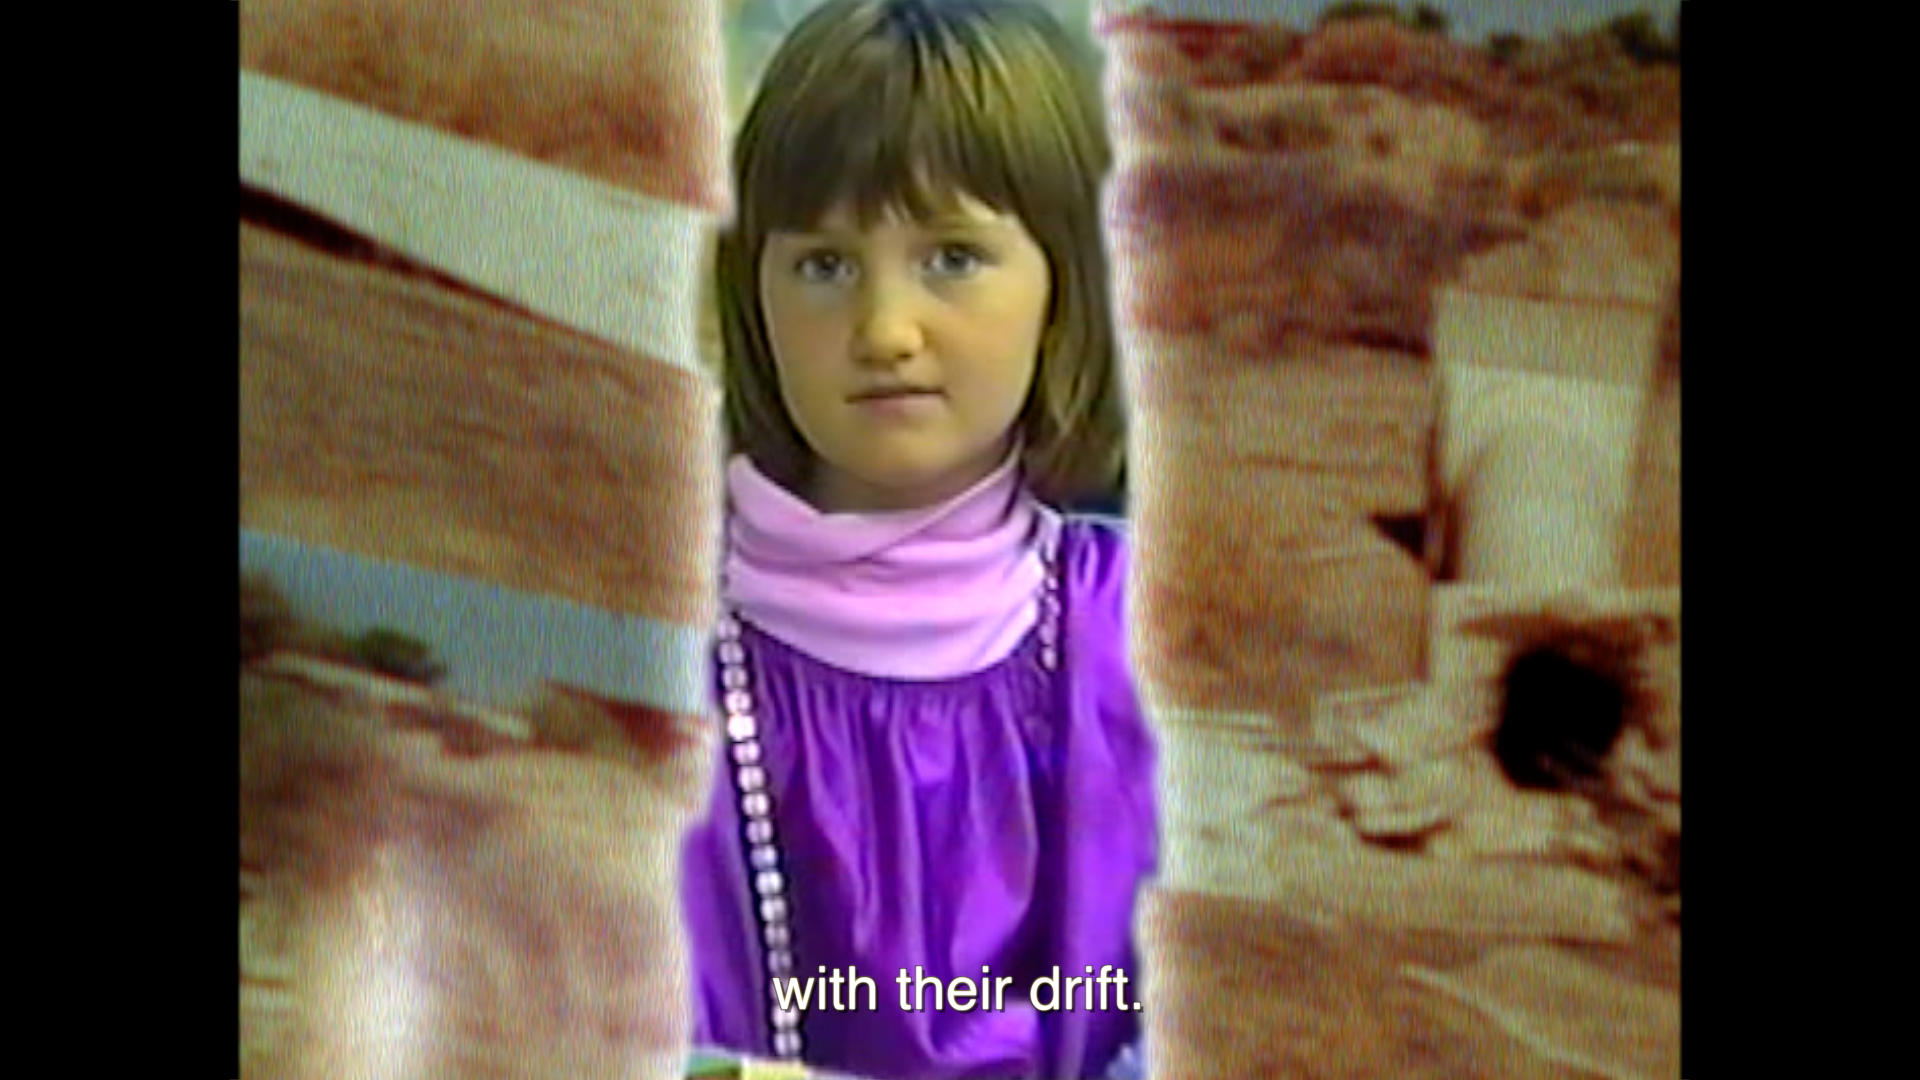 Image of girl with something masking her. The words "with their drift." written at the bottom. 